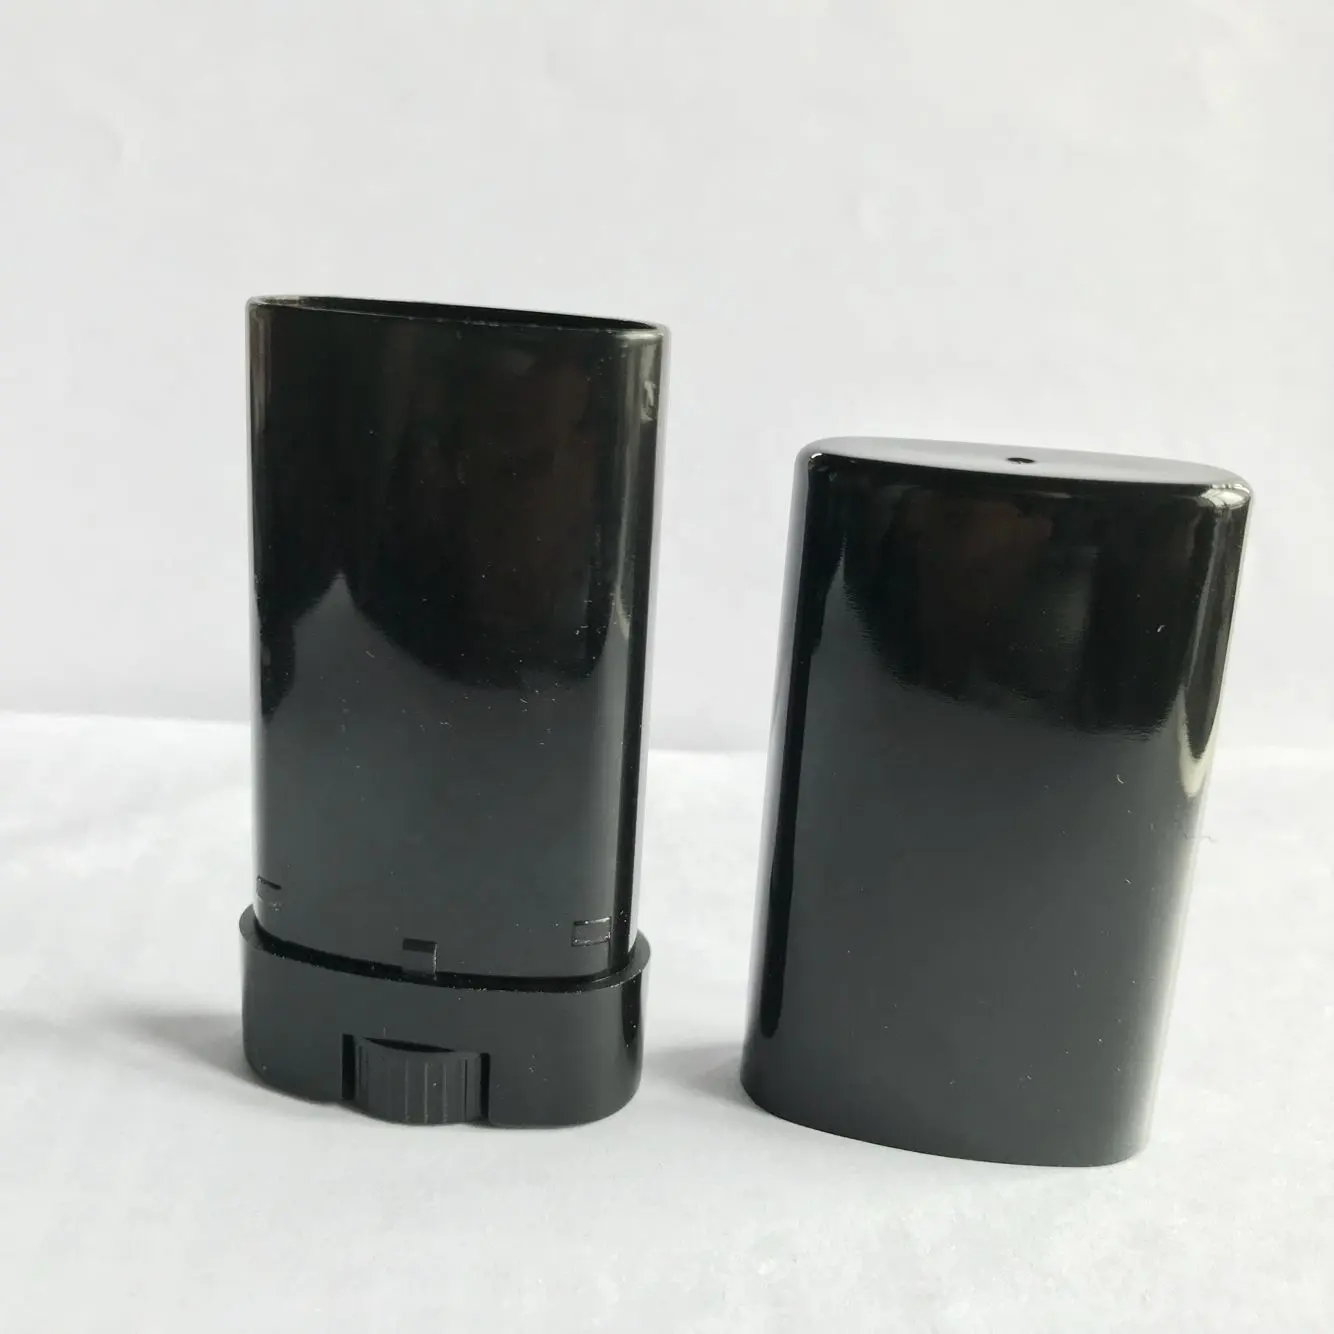 15g oval balm tubes with snap lid in white and black color,oval lip tube